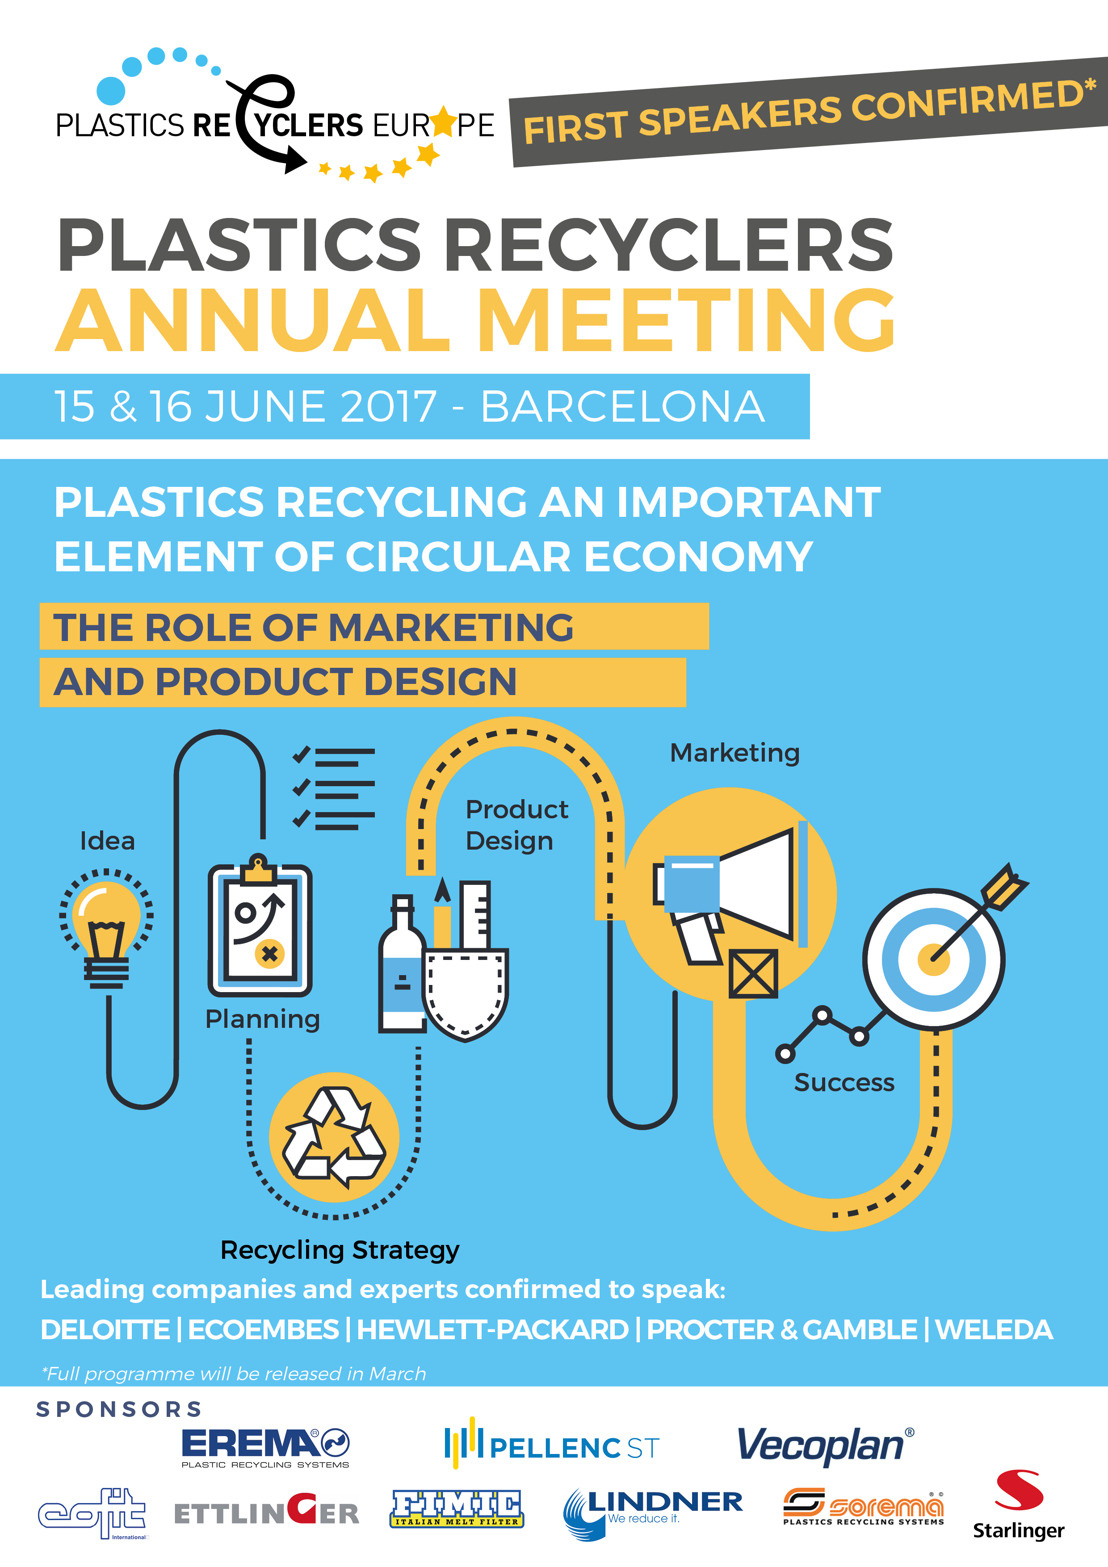 Leading companies and experts to speak at Plastics Recyclers Annual Meeting 2017